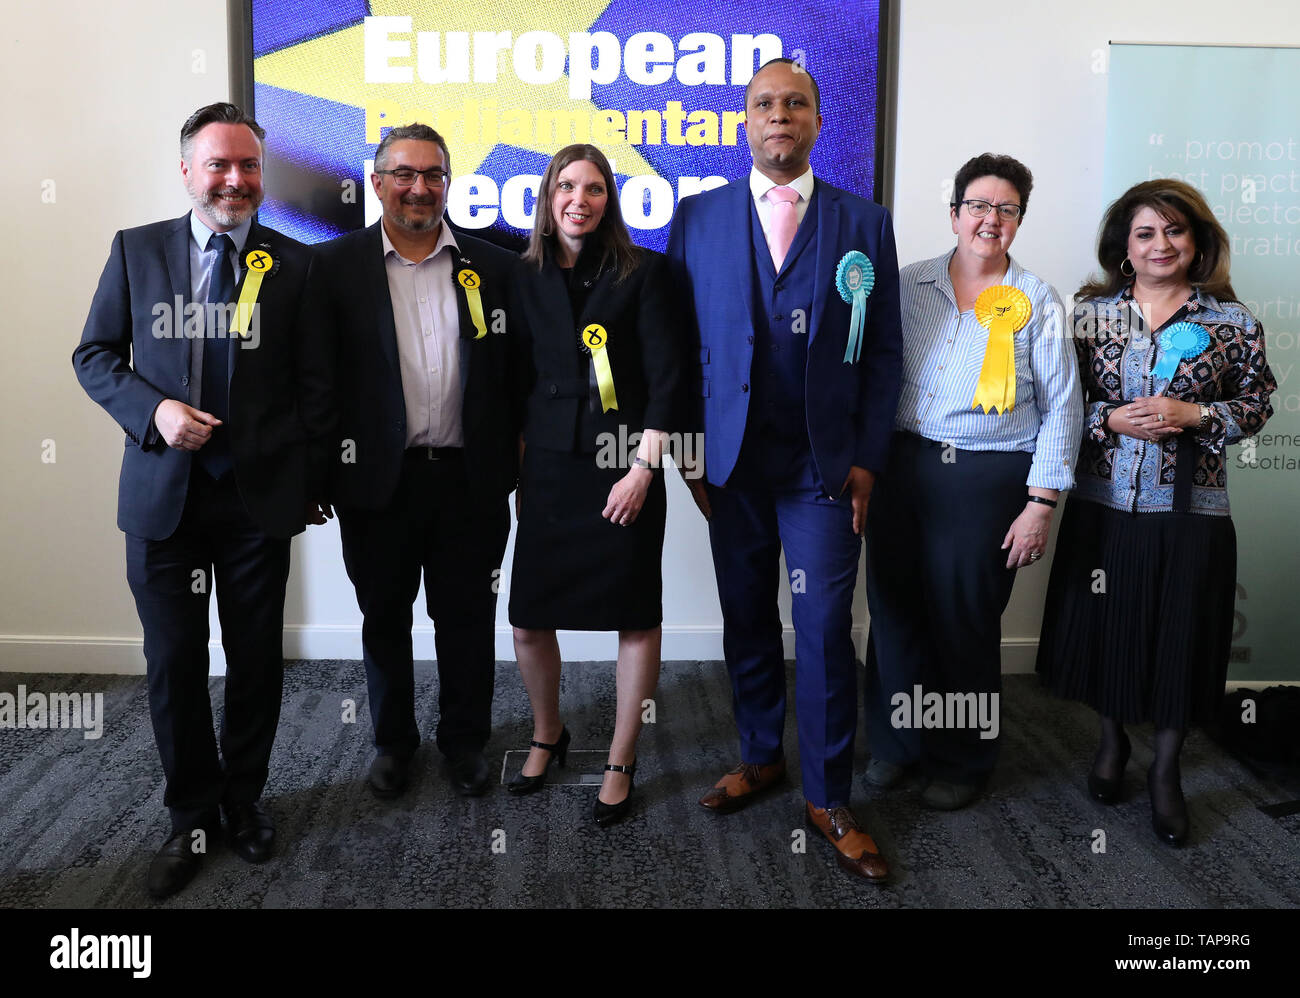 Newly elected MEPs L-r Alyn Smith, Christian Allard, Aileen McLeod, Louis Stedman-Bryce, Sheila Ritchie and Nosheena Mobarik at the European Parliamentary elections count at the City Chambers in Edinburgh. Stock Photo